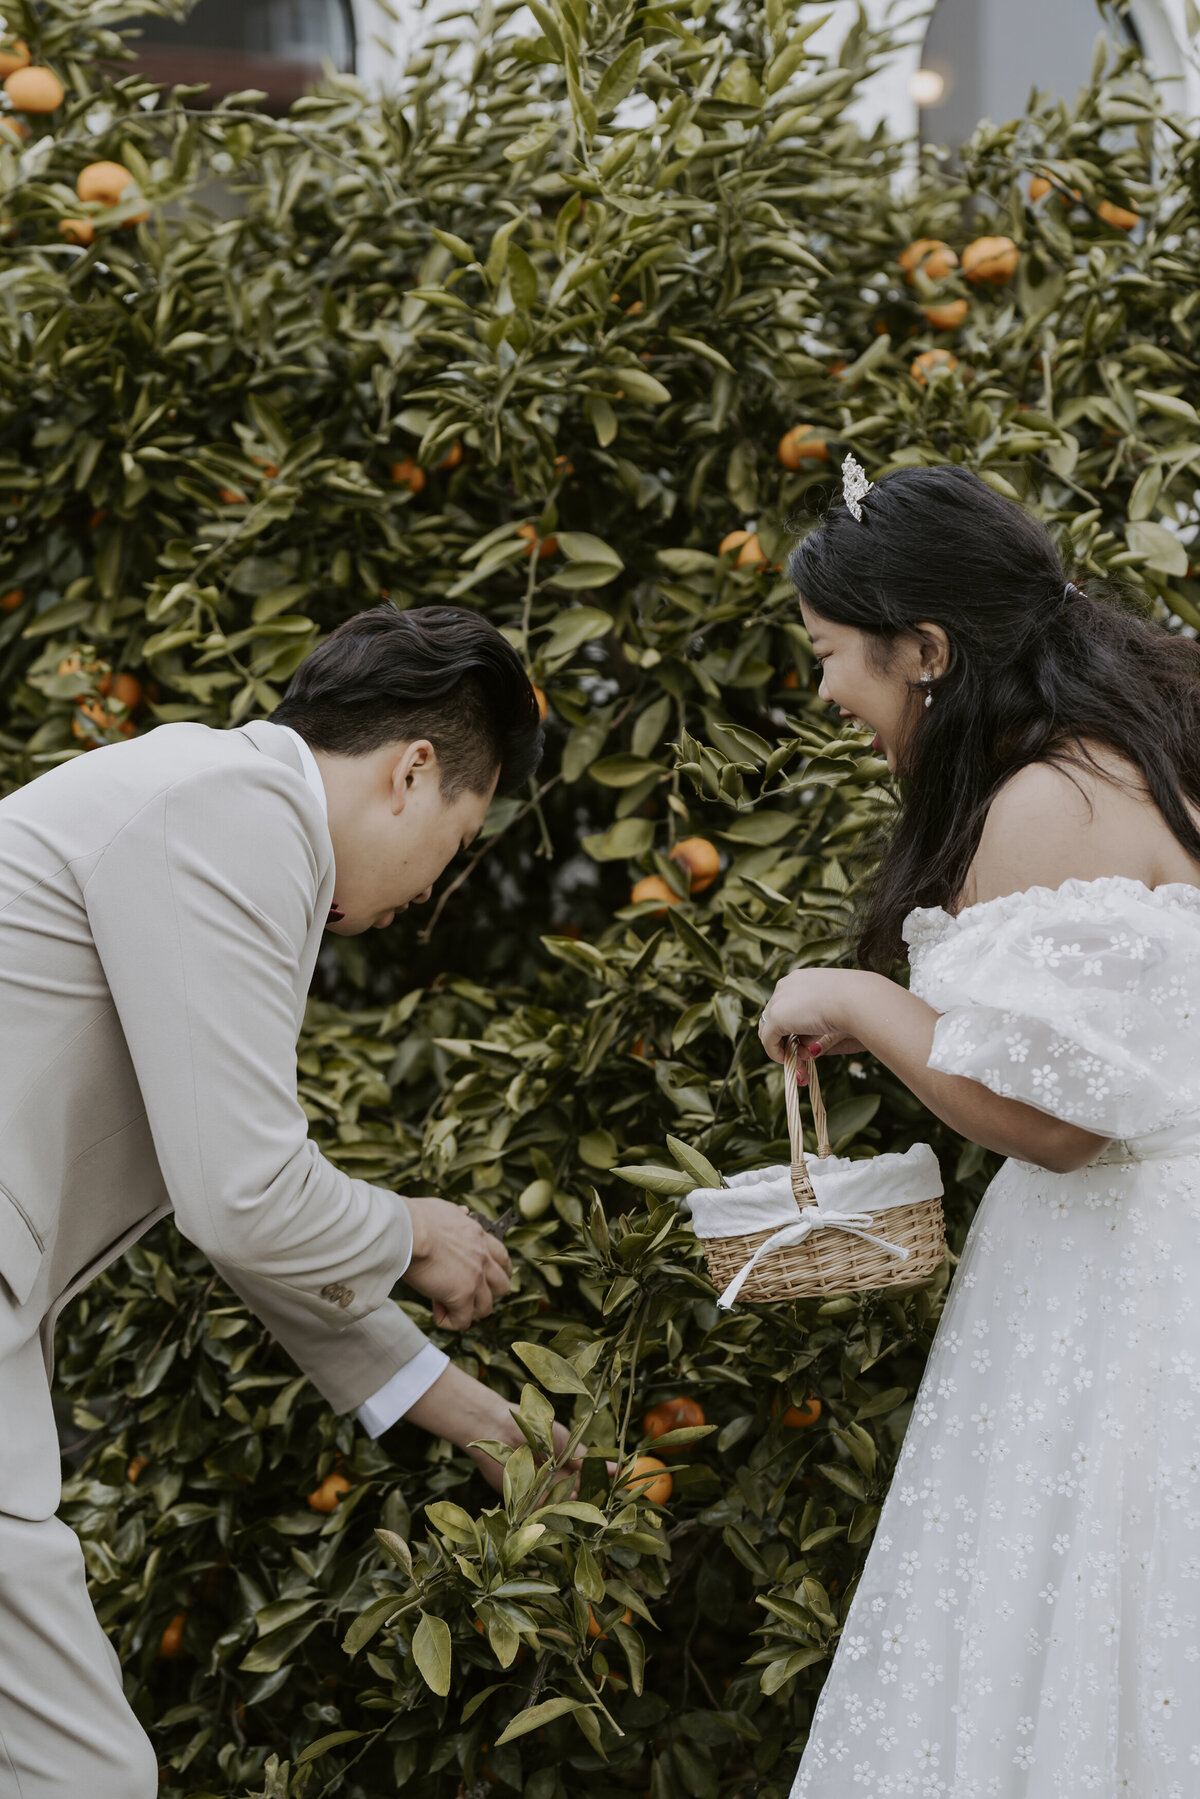 the groom picking tangerines while the bride is waiting and laughing at him